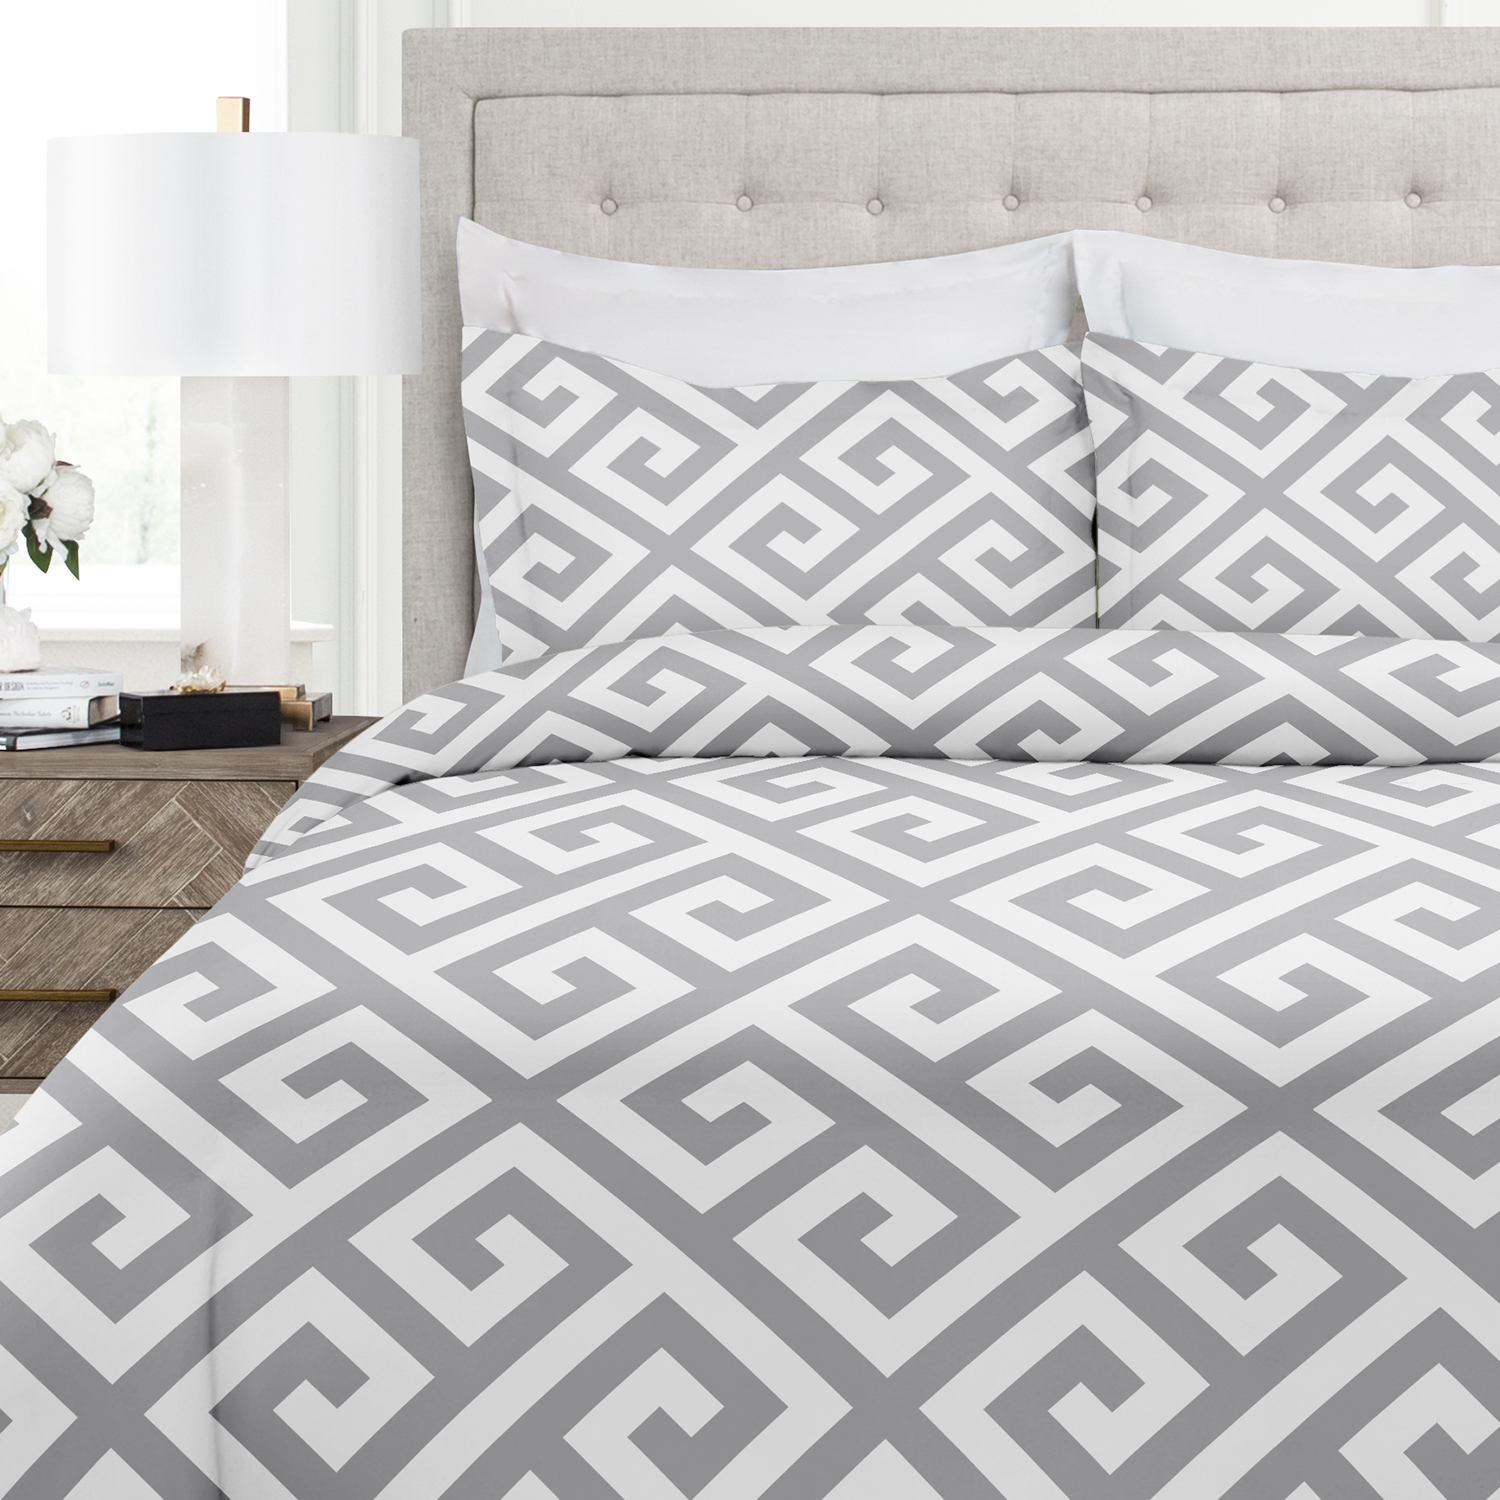 Italian Collection 3 Piece Duvet Cover Set with Greek Key Pattern by iEnjoy Home